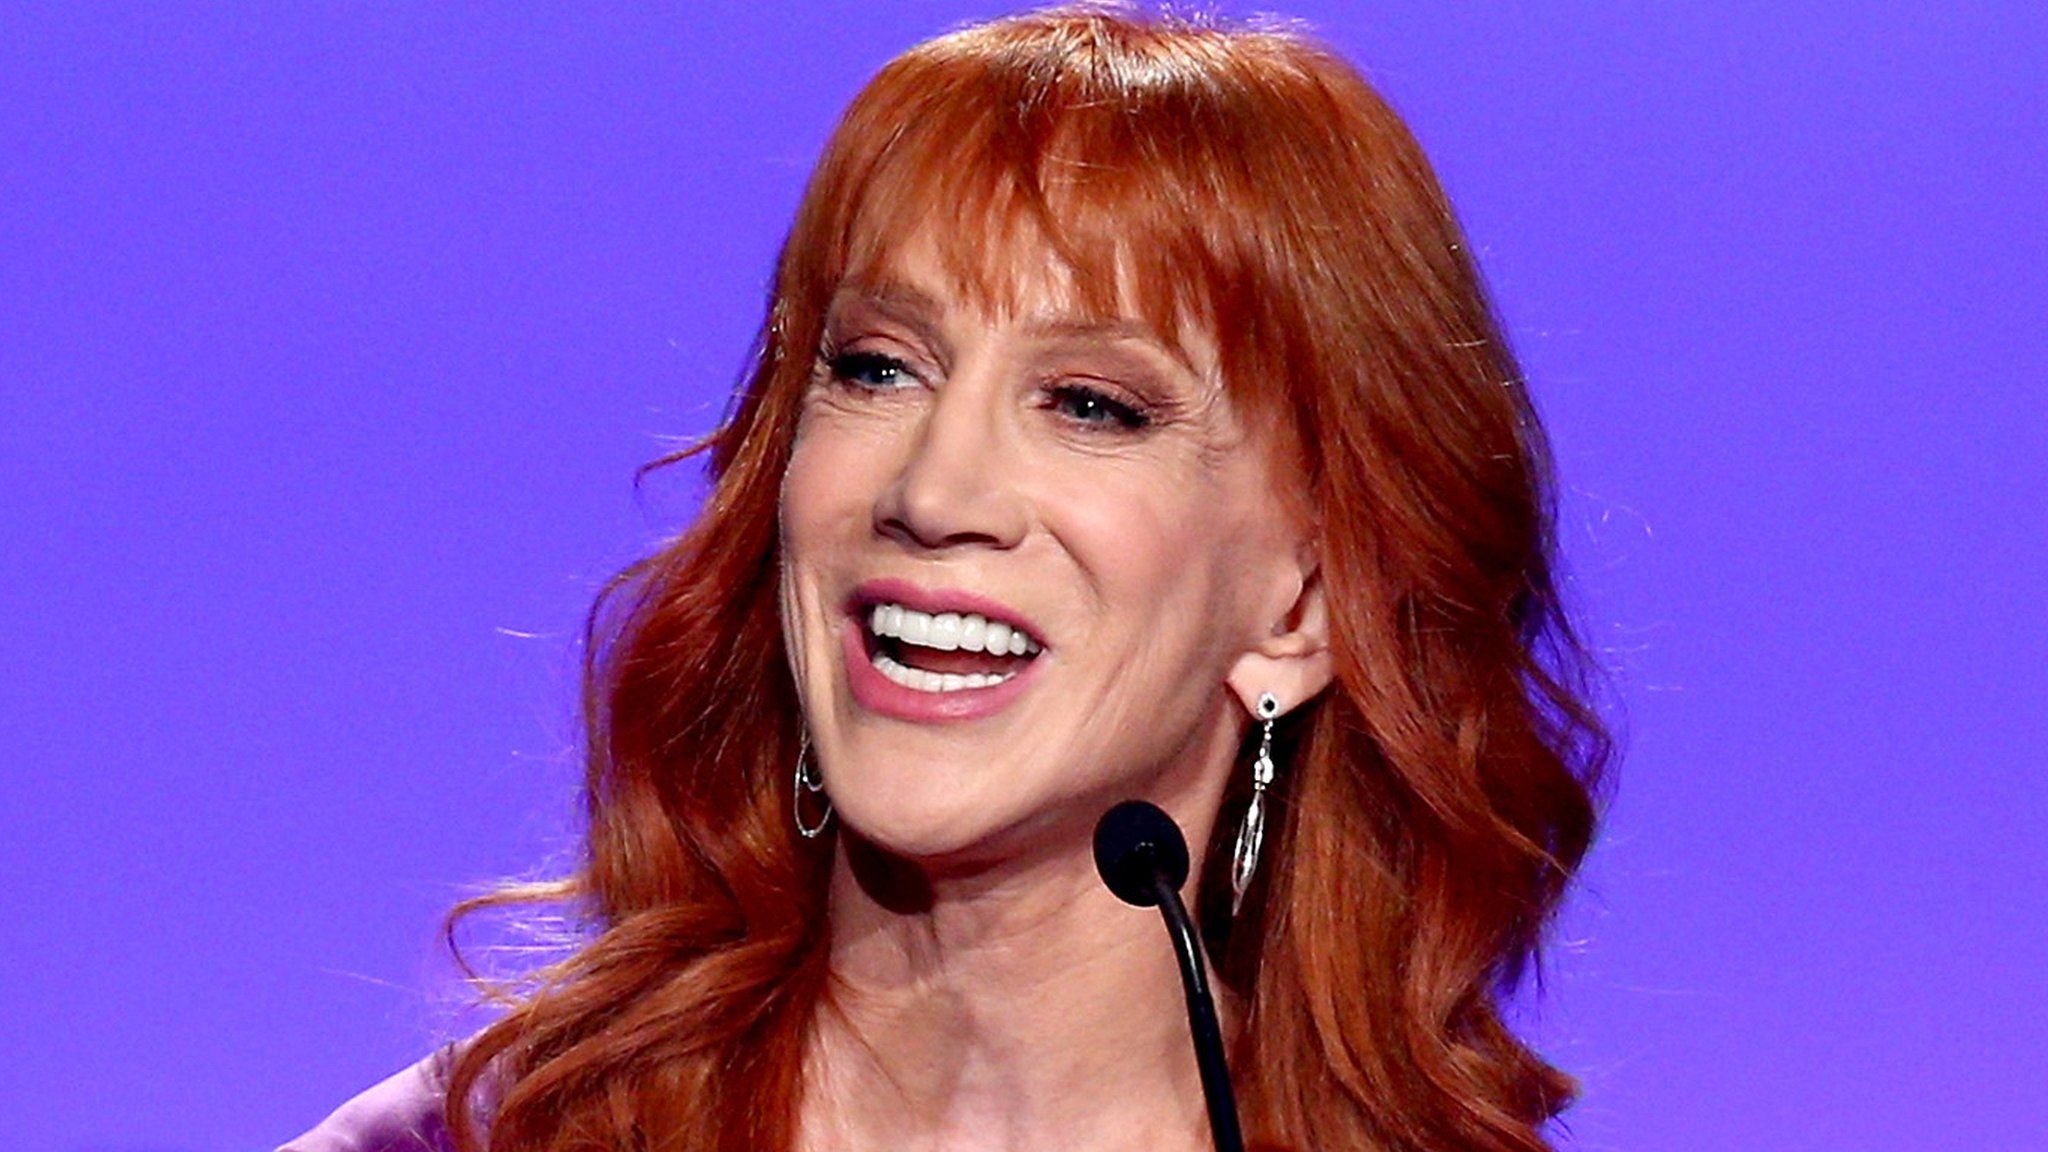 Comedian Kathy Griffin speaks onstage during the 24th Annual Race To Erase MS Gala at The Beverly Hilton Hotel on May 5, 2017 in Beverly Hills, California